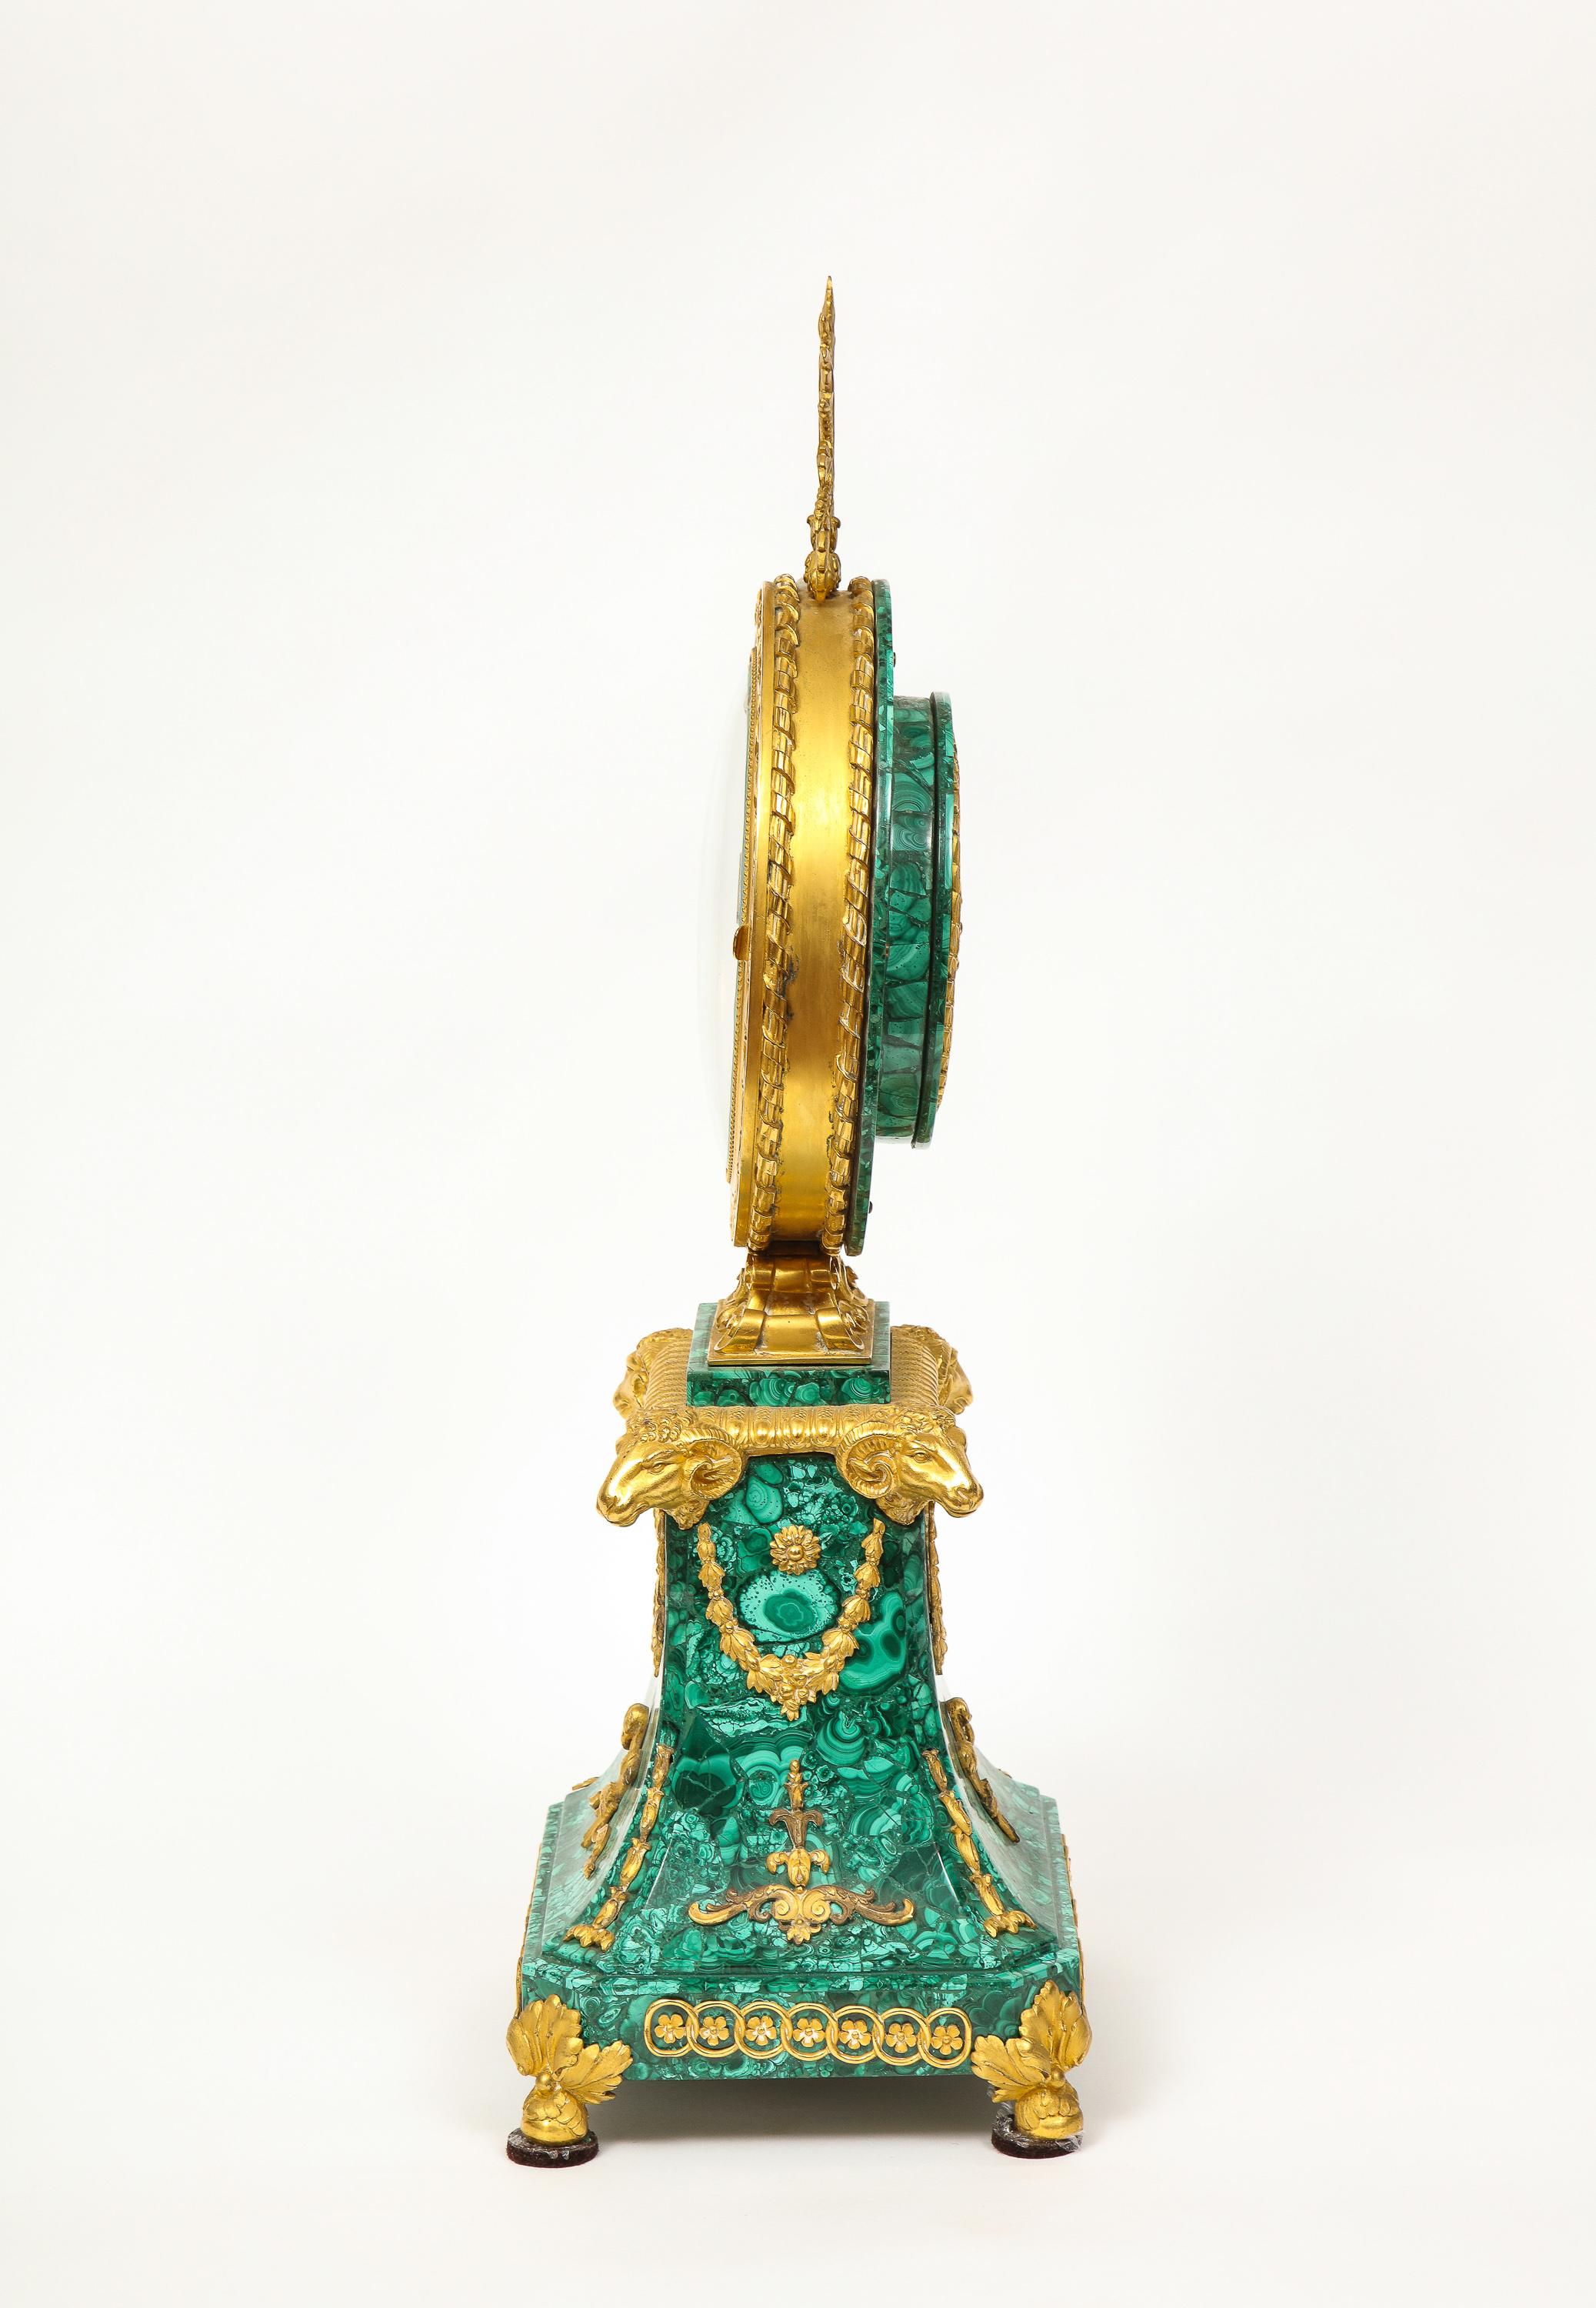 Edward F. Caldwell, An Extremely Fine and Rare Ormolu-Mounted Malachite Clock For Sale 2